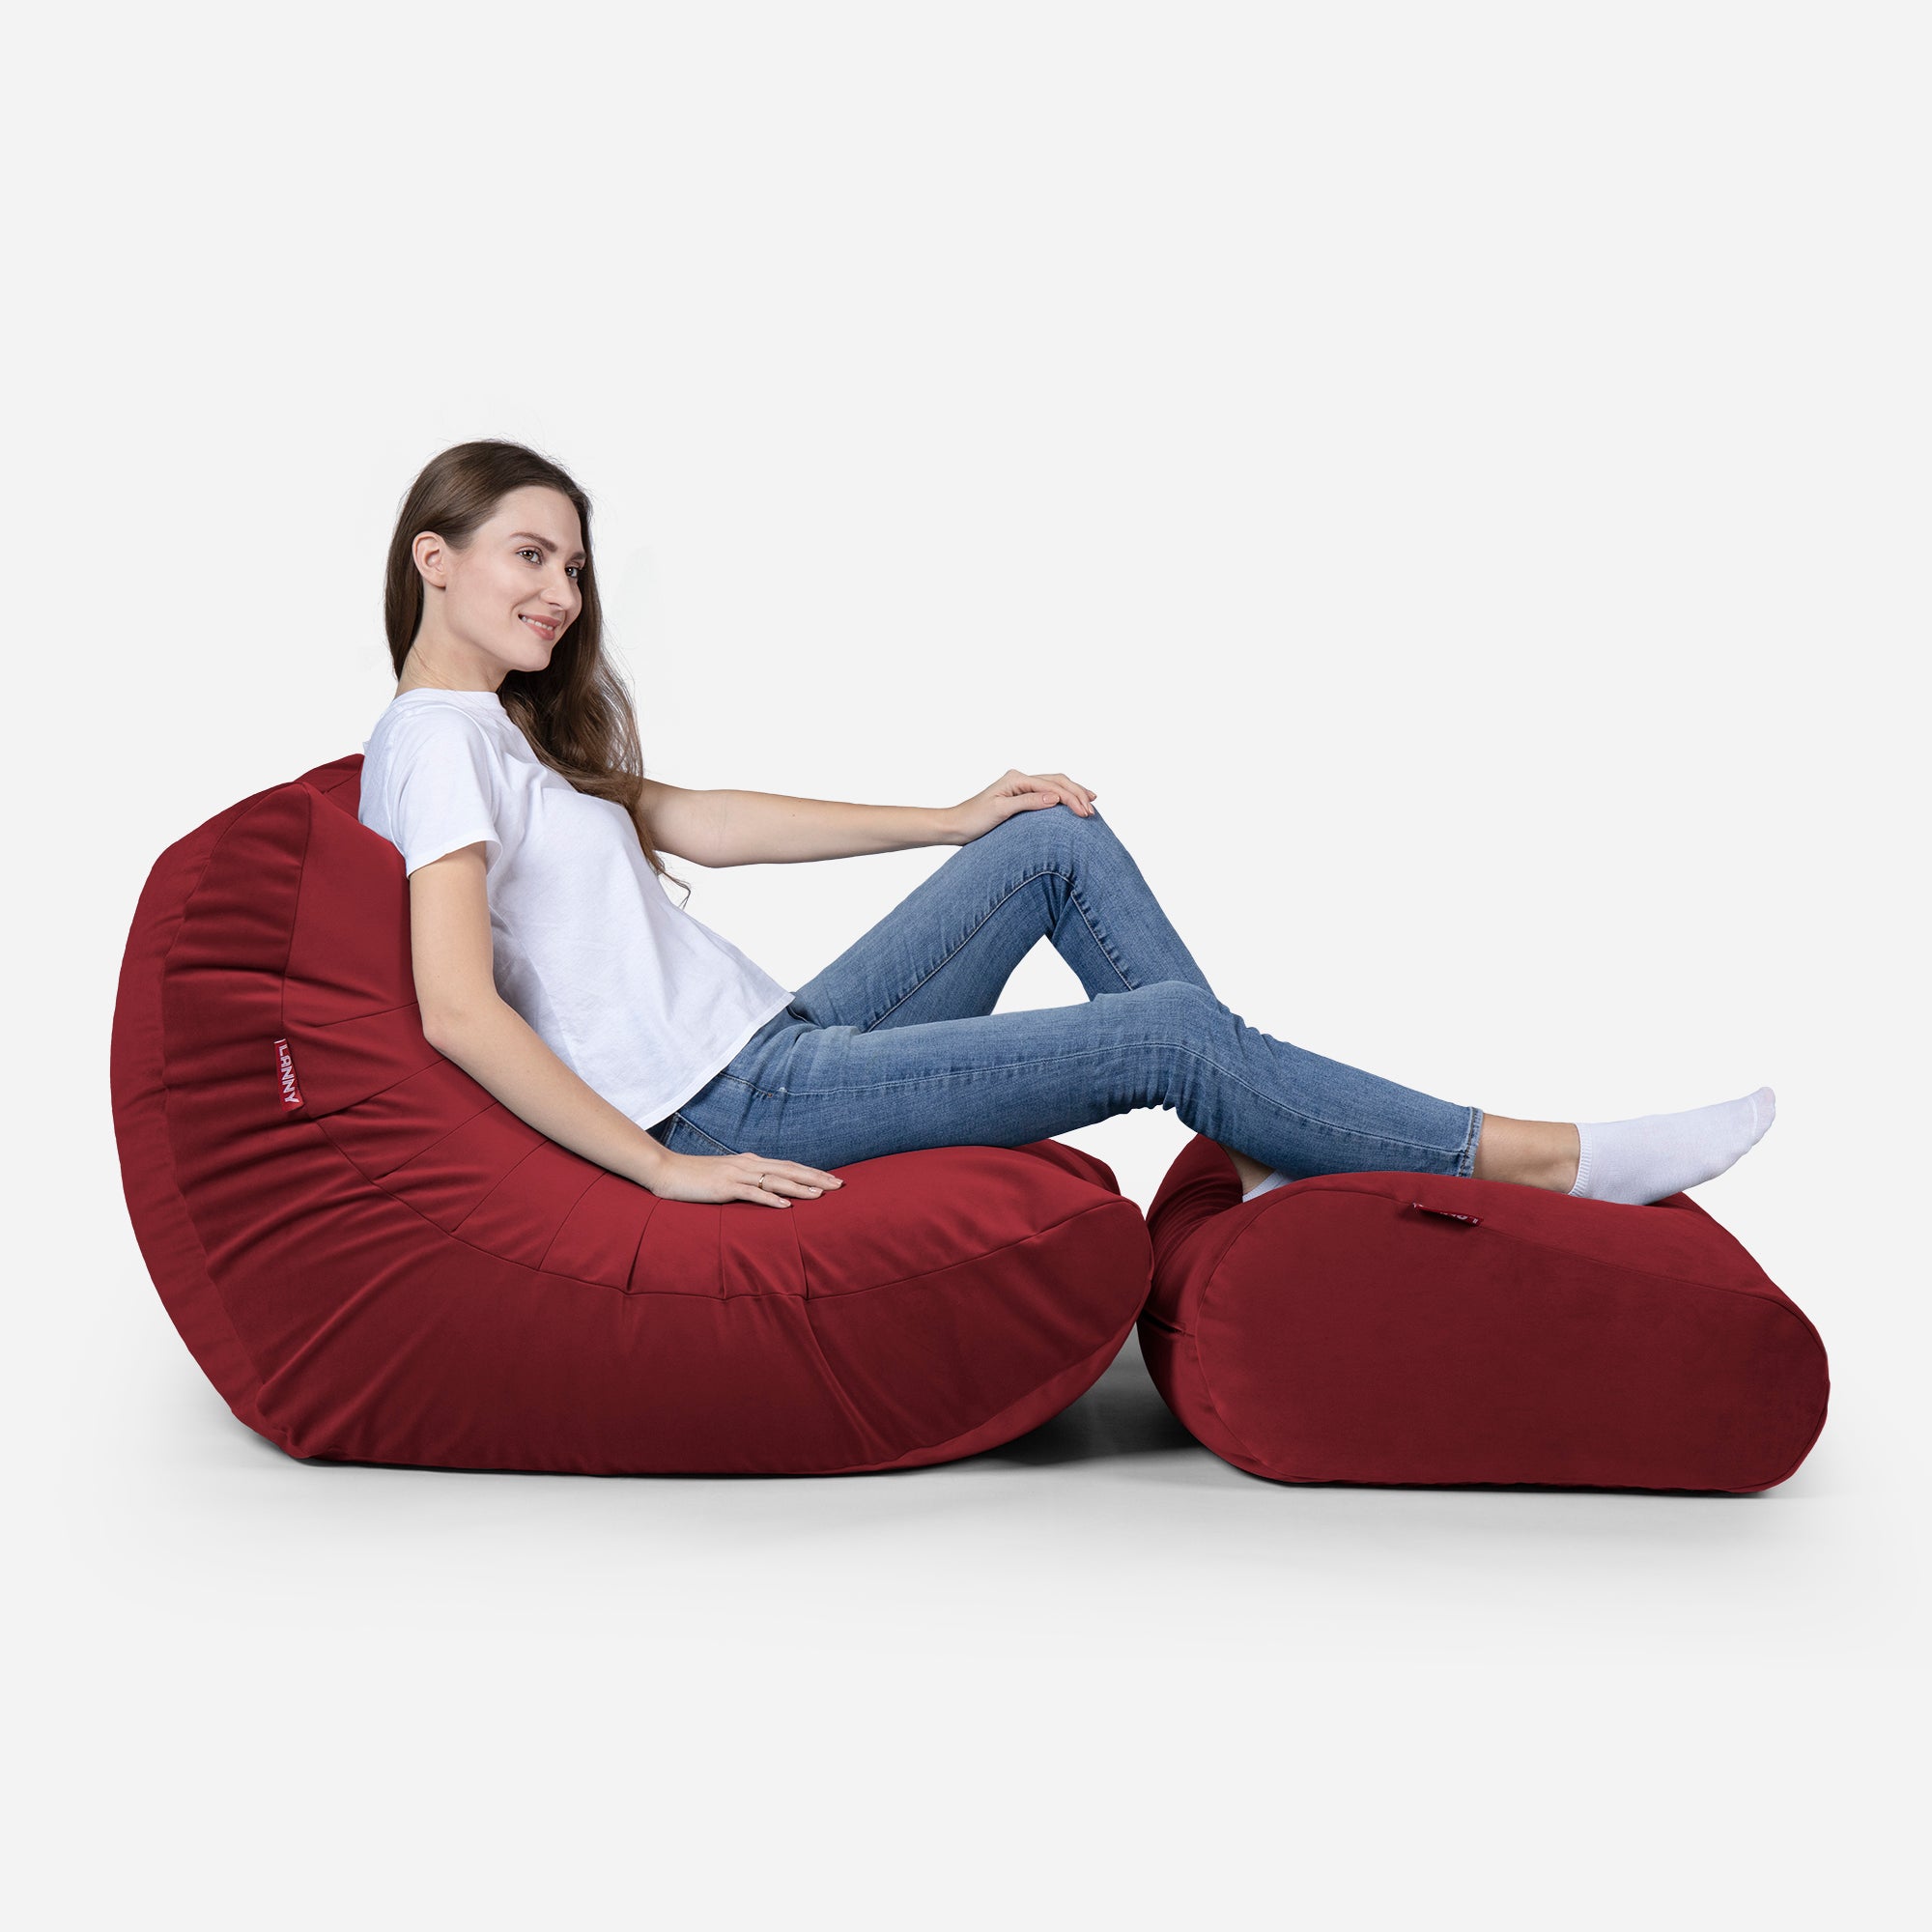 Beanbag Curvy Design Red color with girl seating on it